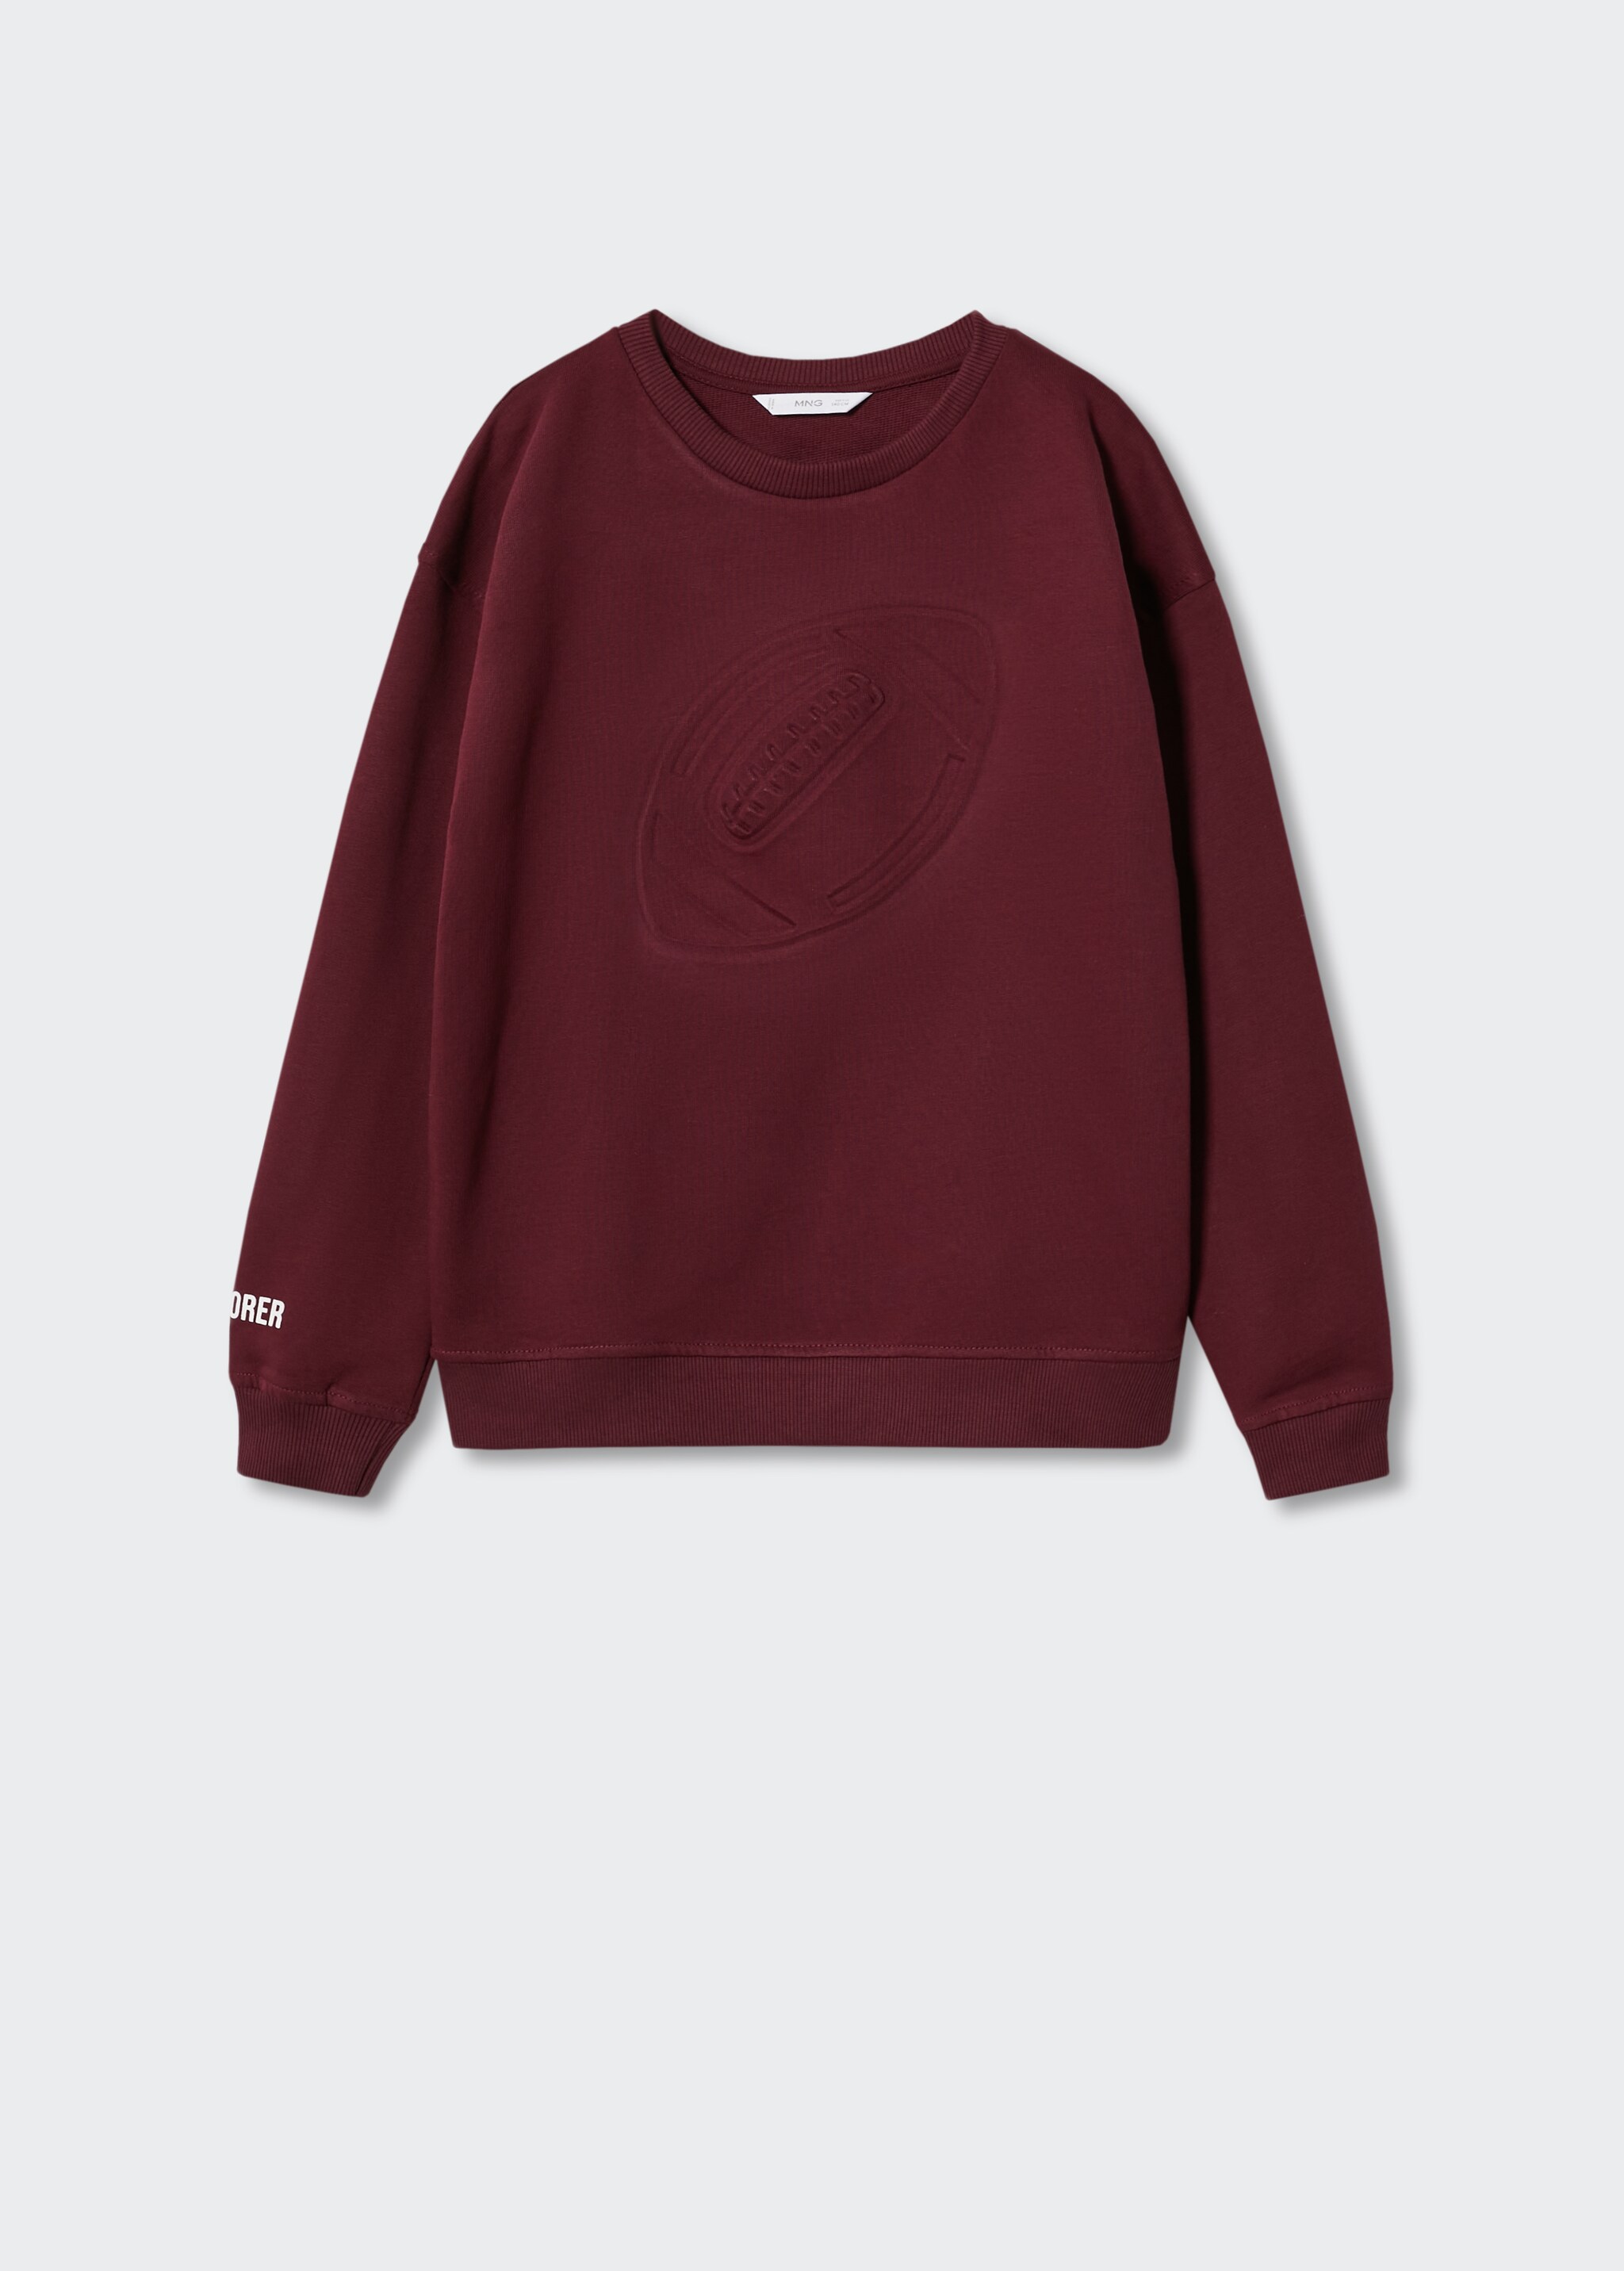 Printed embossed sweatshirt - Article without model